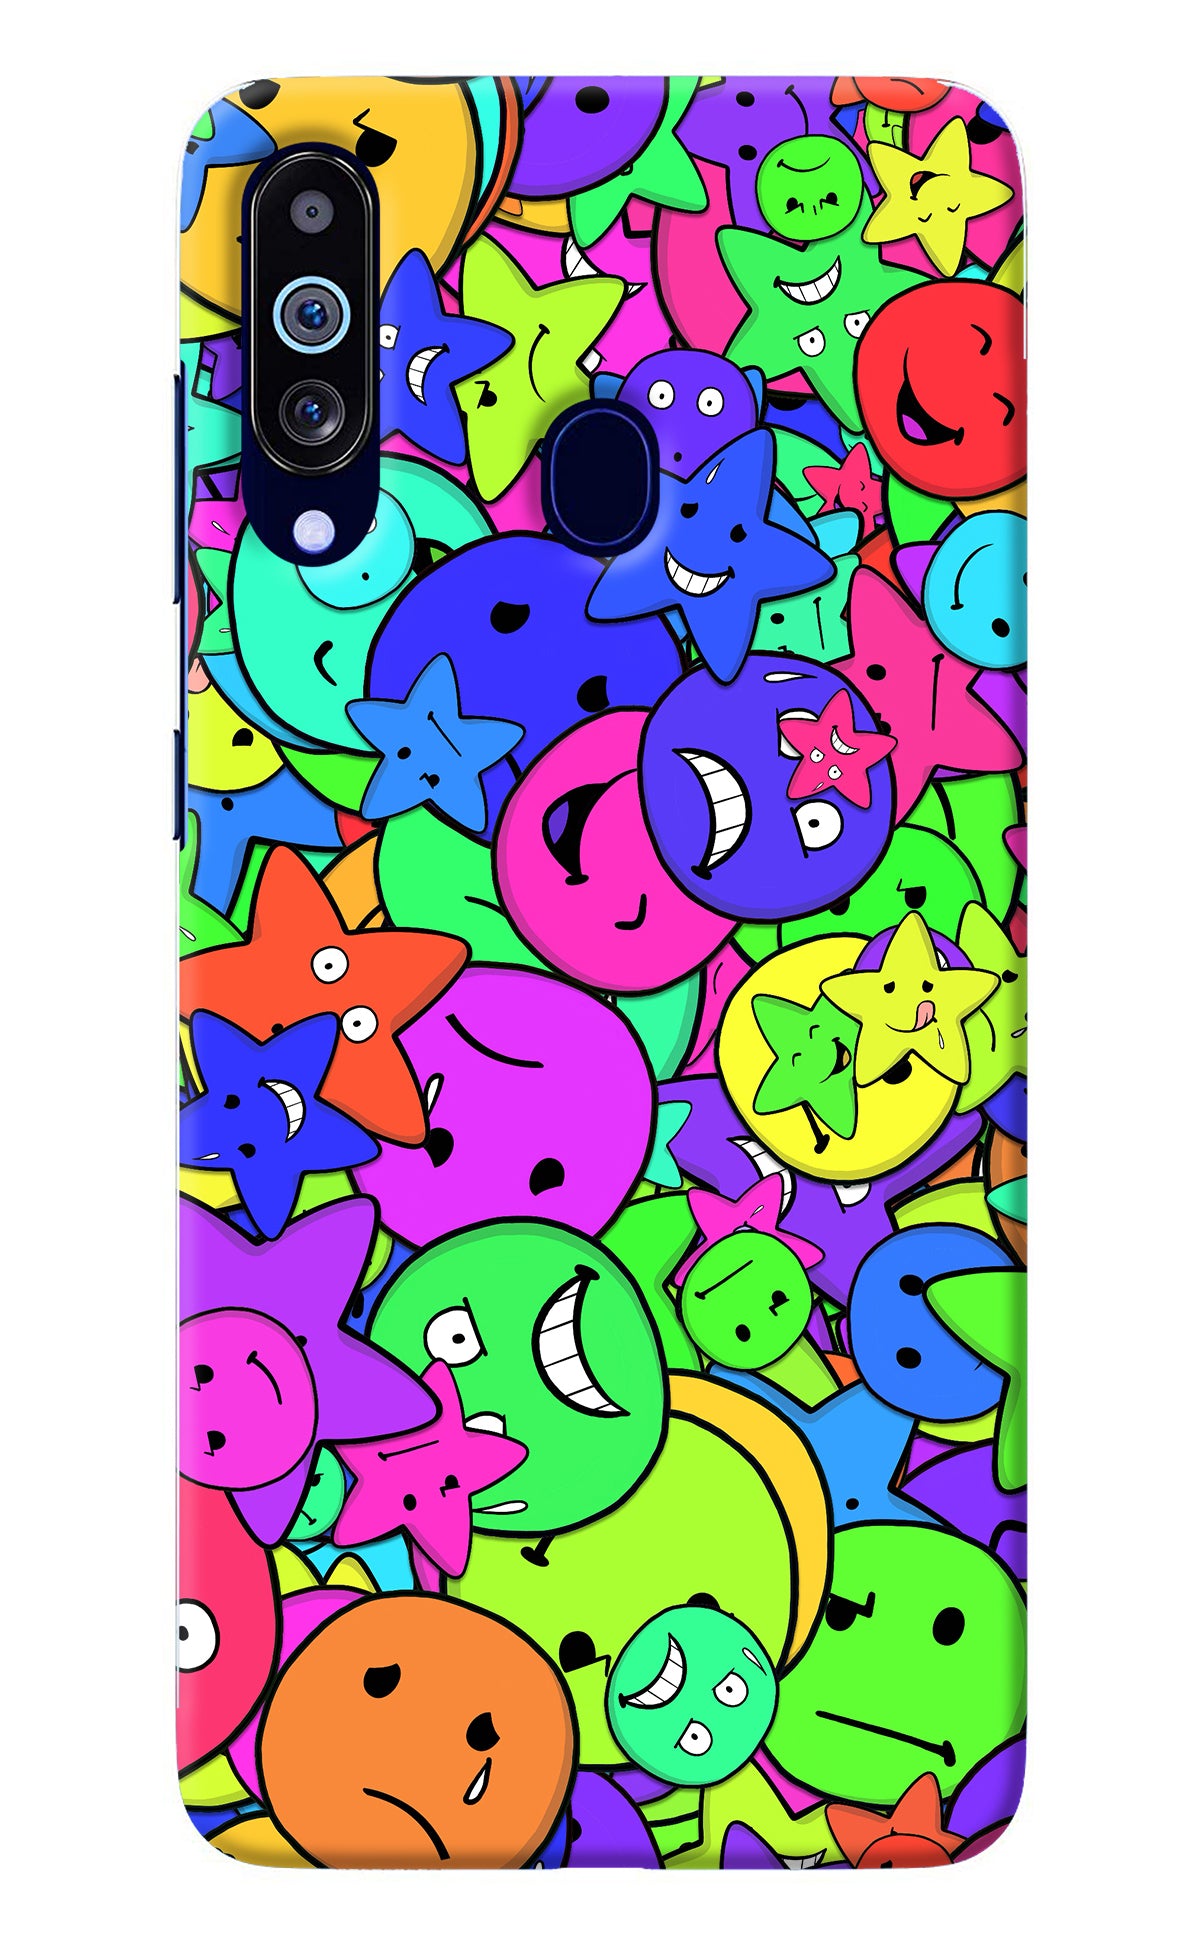 Fun Doodle Samsung M40/A60 Back Cover